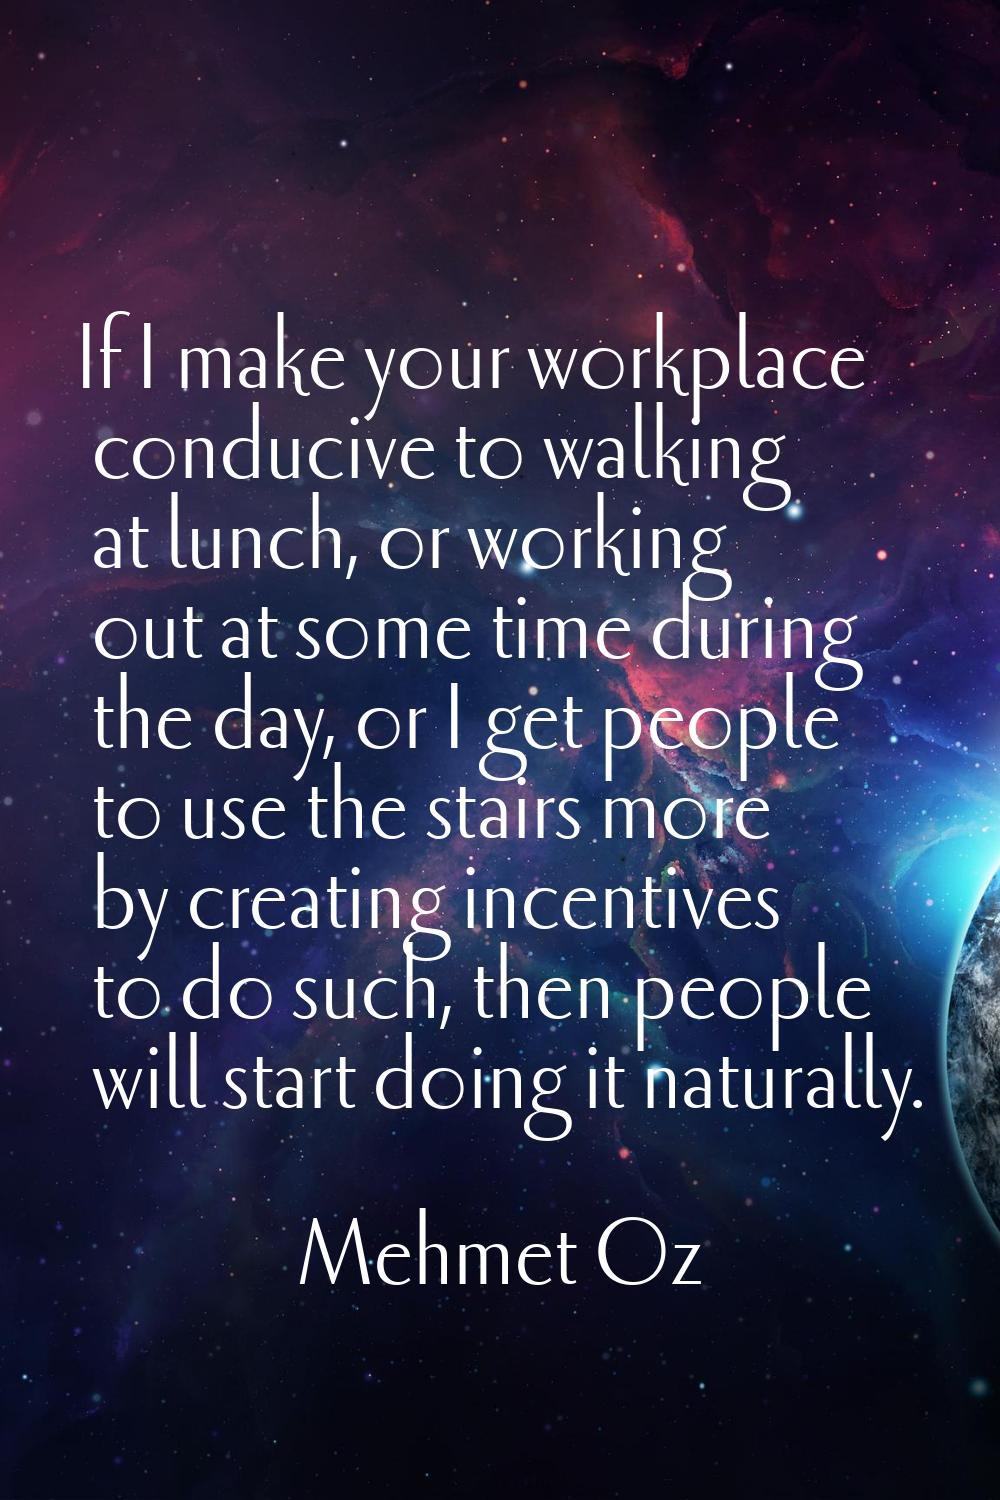 If I make your workplace conducive to walking at lunch, or working out at some time during the day,